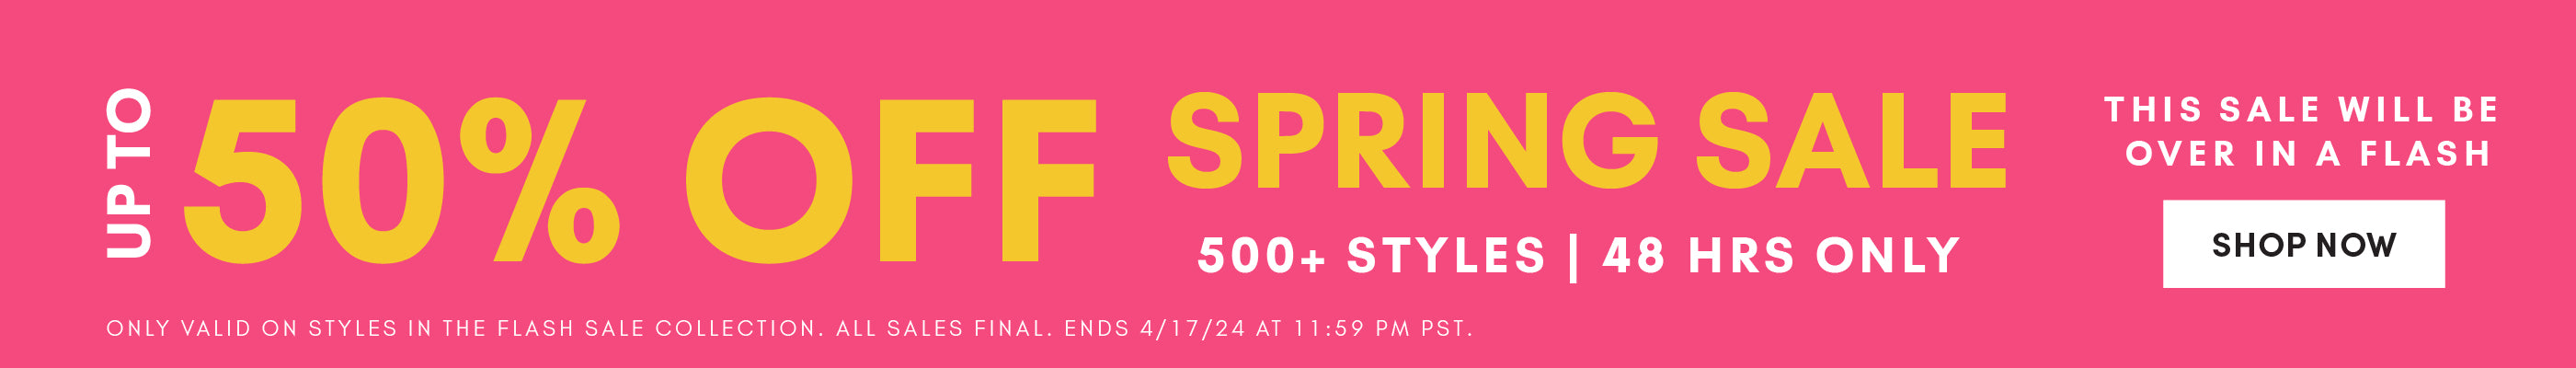 up to 50% OFF spring sale. 500+ styles only 48 hrs. this sale will be over in a flash. shop now. links to the flash sale collection.